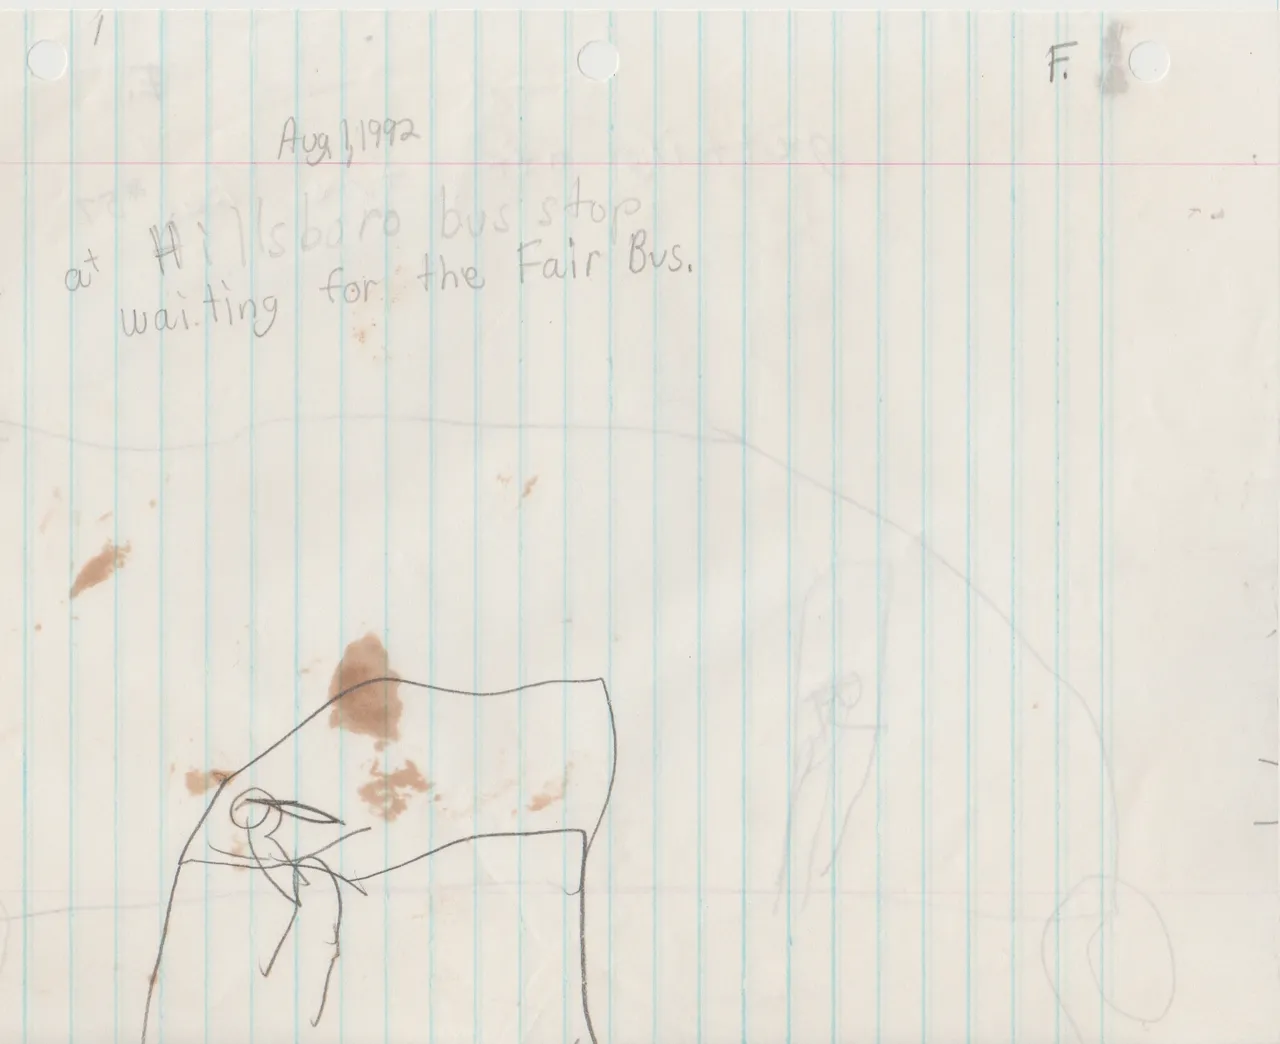 1992-08-01 - Saturday - Fair - Seven-year-old Joey's diary - Indians, Pirates, petting zoo - Hillsboro, OR-08.jpg